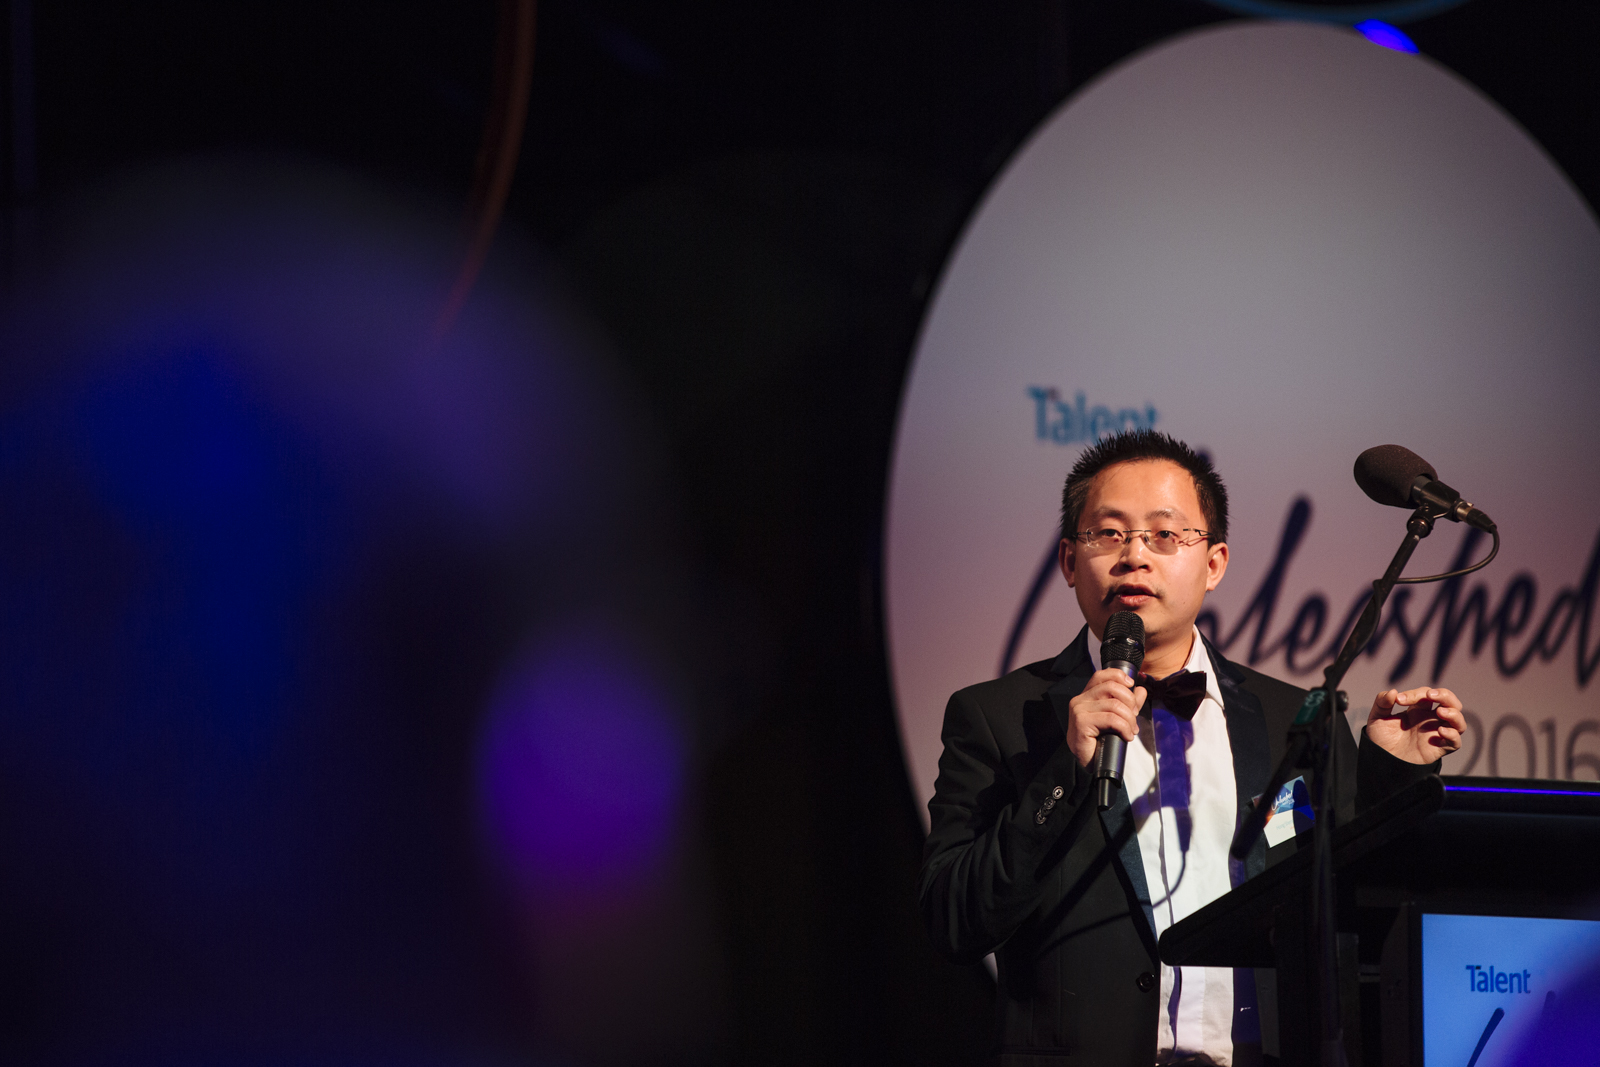 Dr Hong pitches at Talent Unleashed